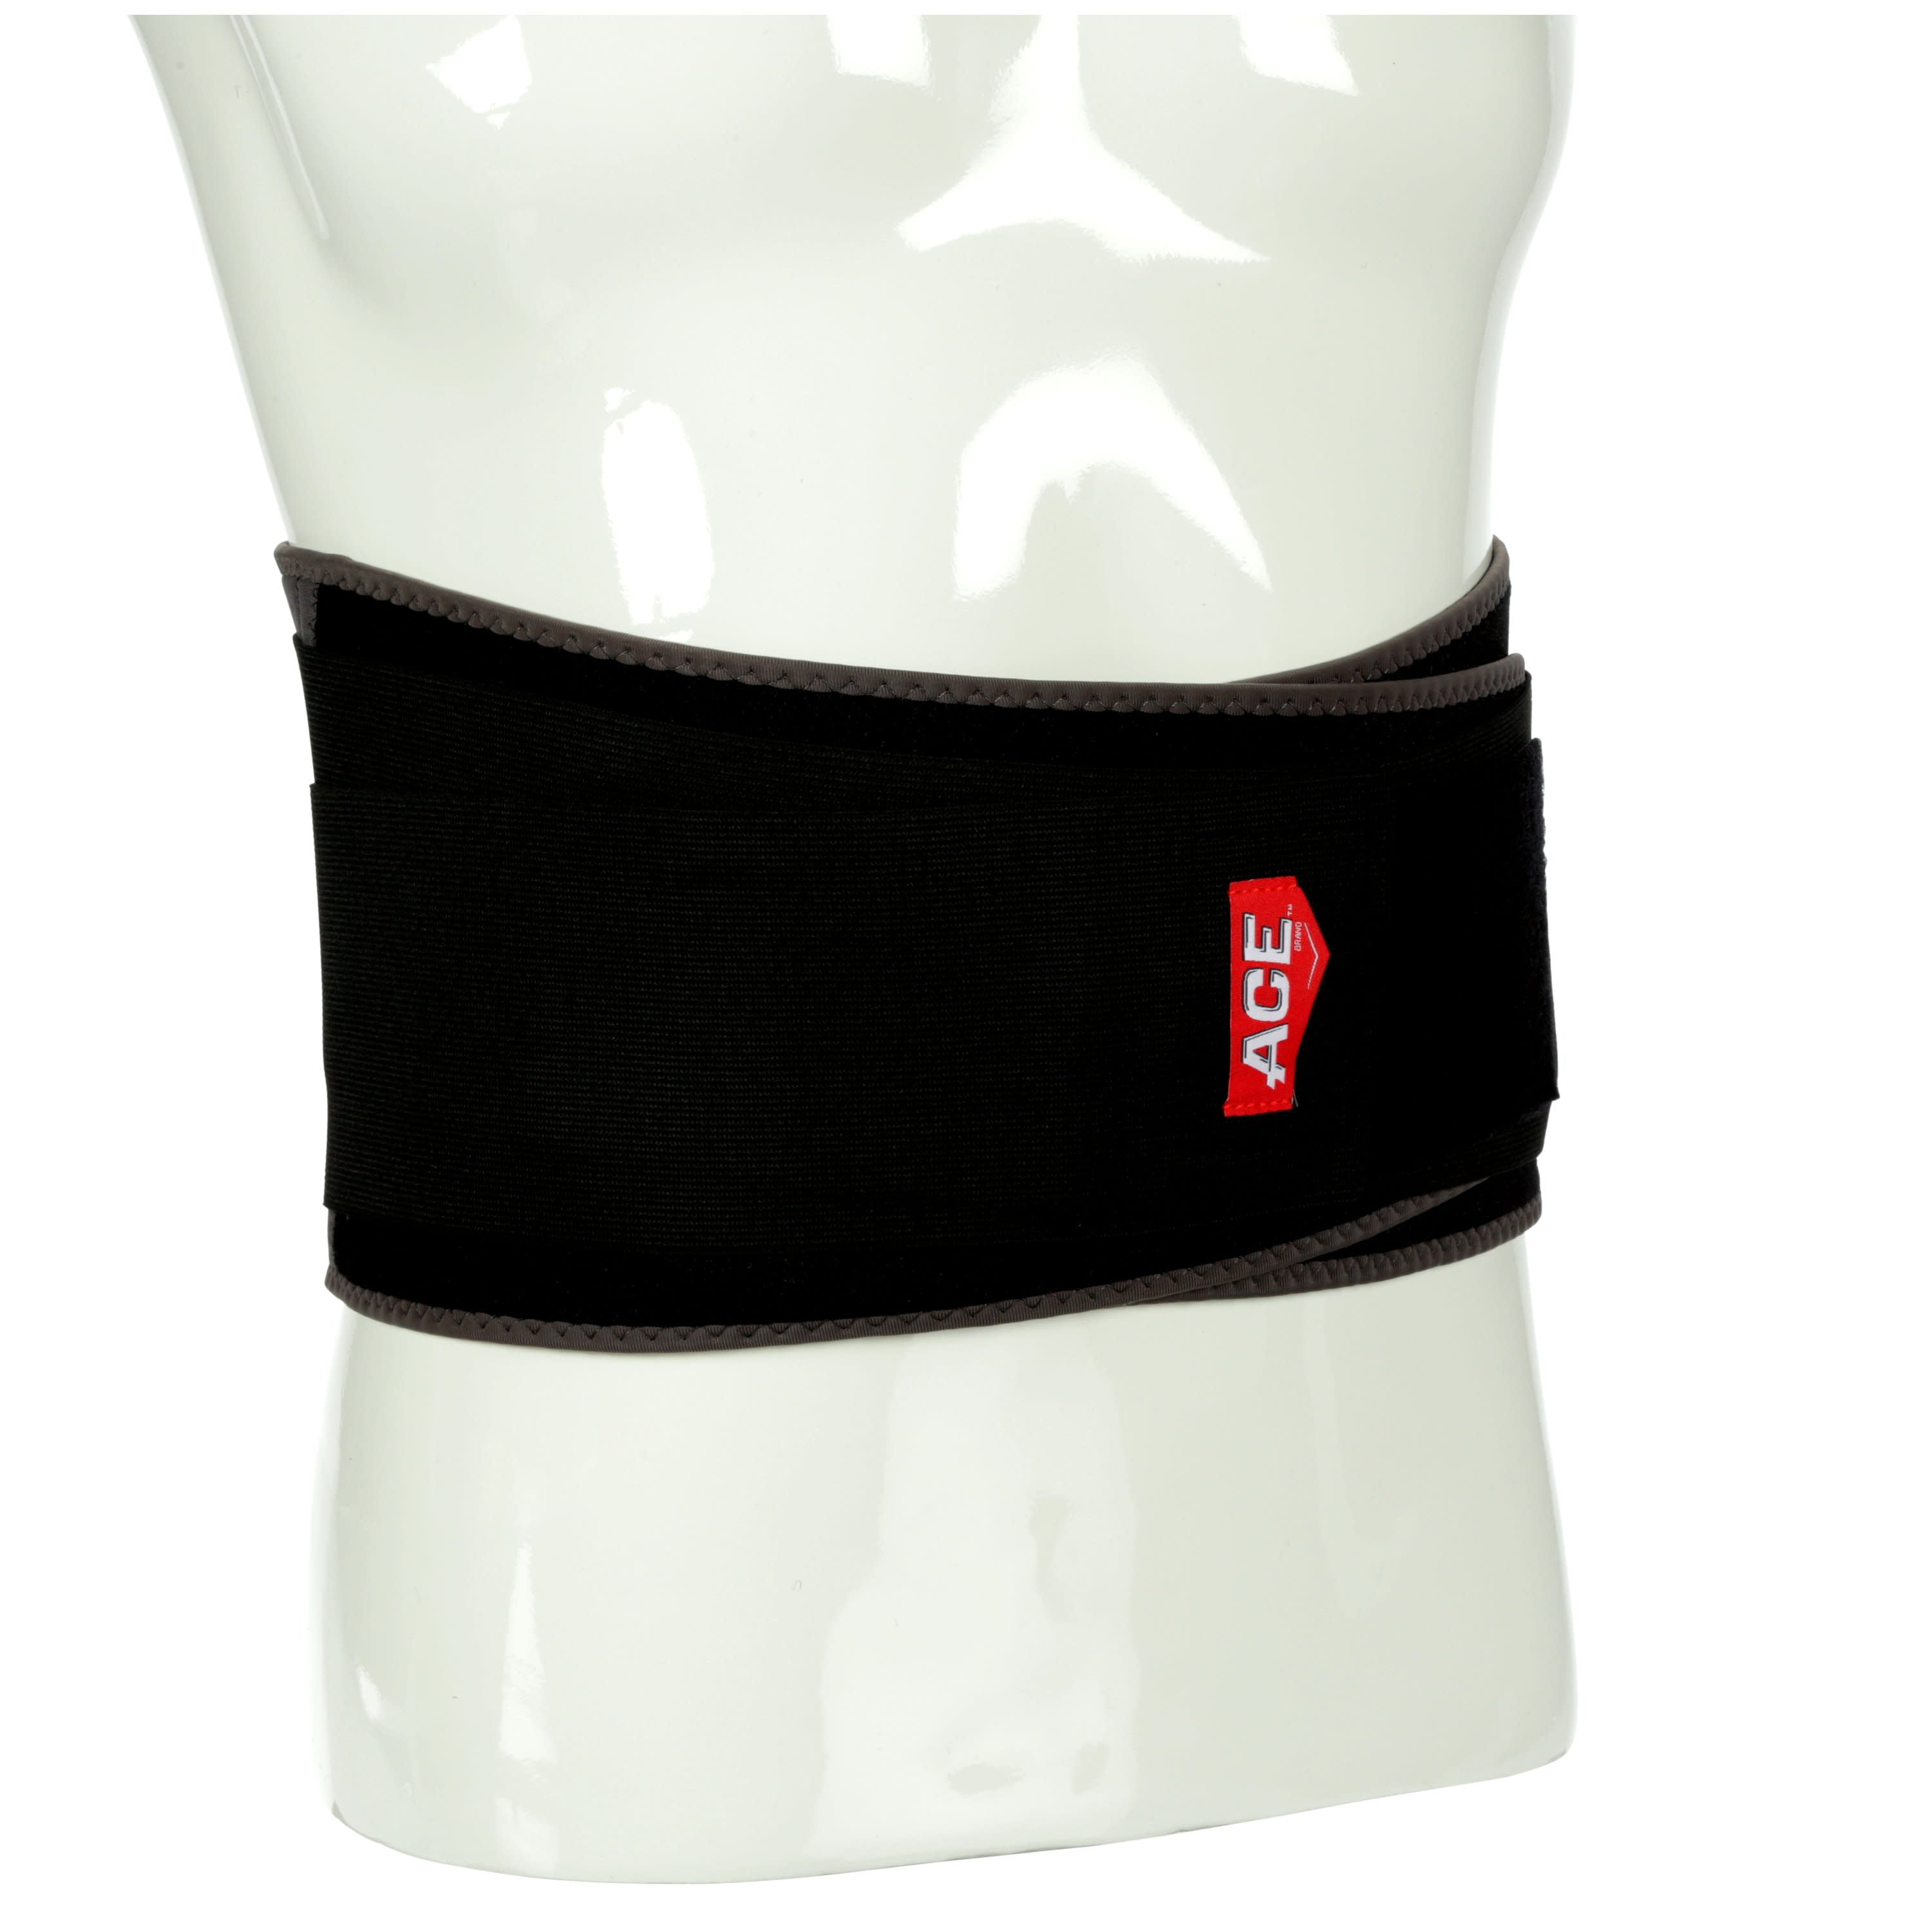 ACE Brand Deluxe Back Stabilizer with Lumbar Support, Adjustable Brace 